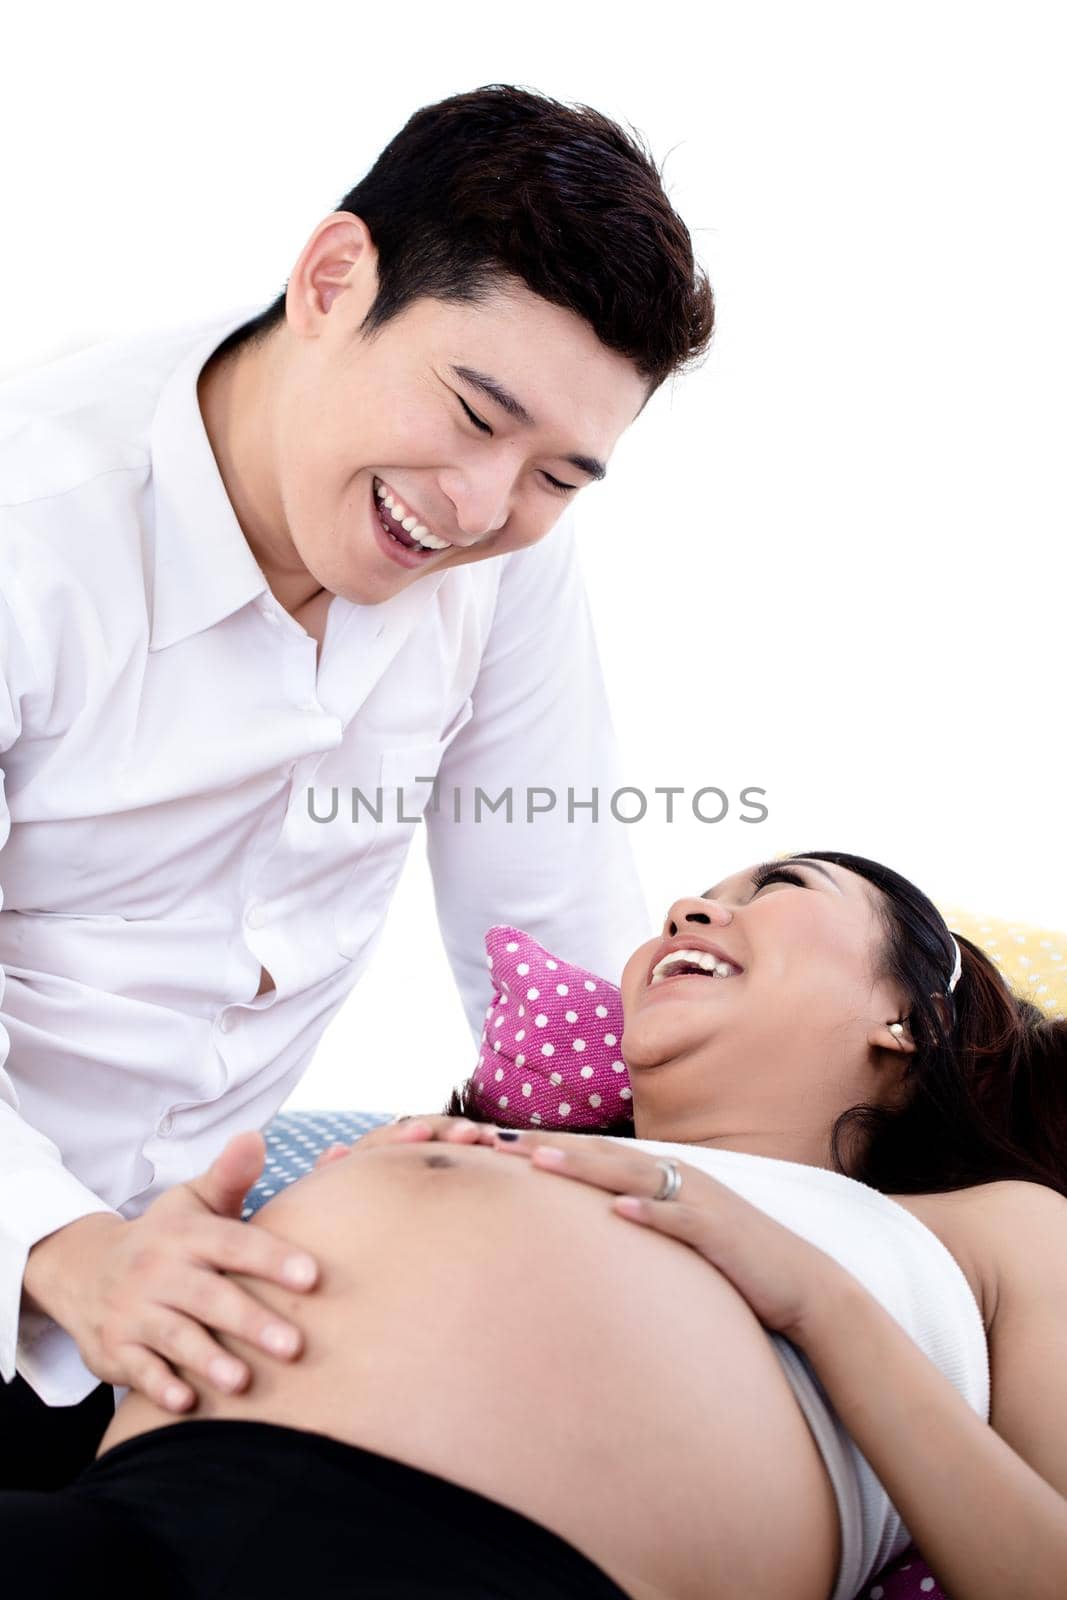 Smiling husband taking care of his pregnant wife by Kzenon